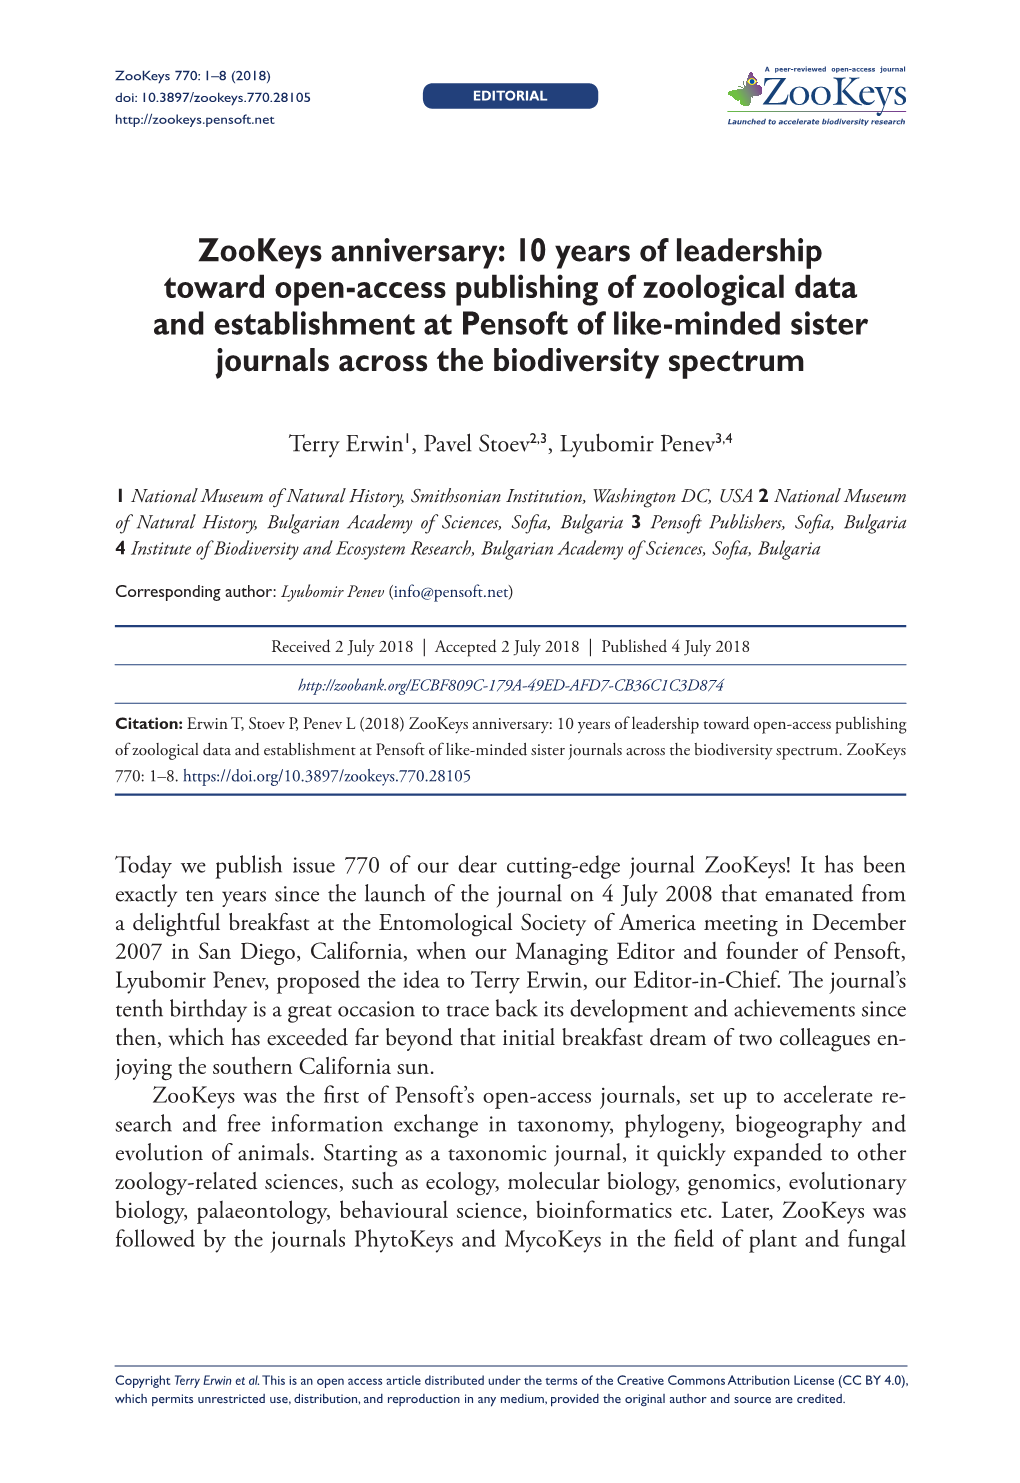 ﻿Zookeys Anniversary: 10 Years of Leadership Toward Open-Access Publishing of Zoological Data and Establishment at Pensoft Of